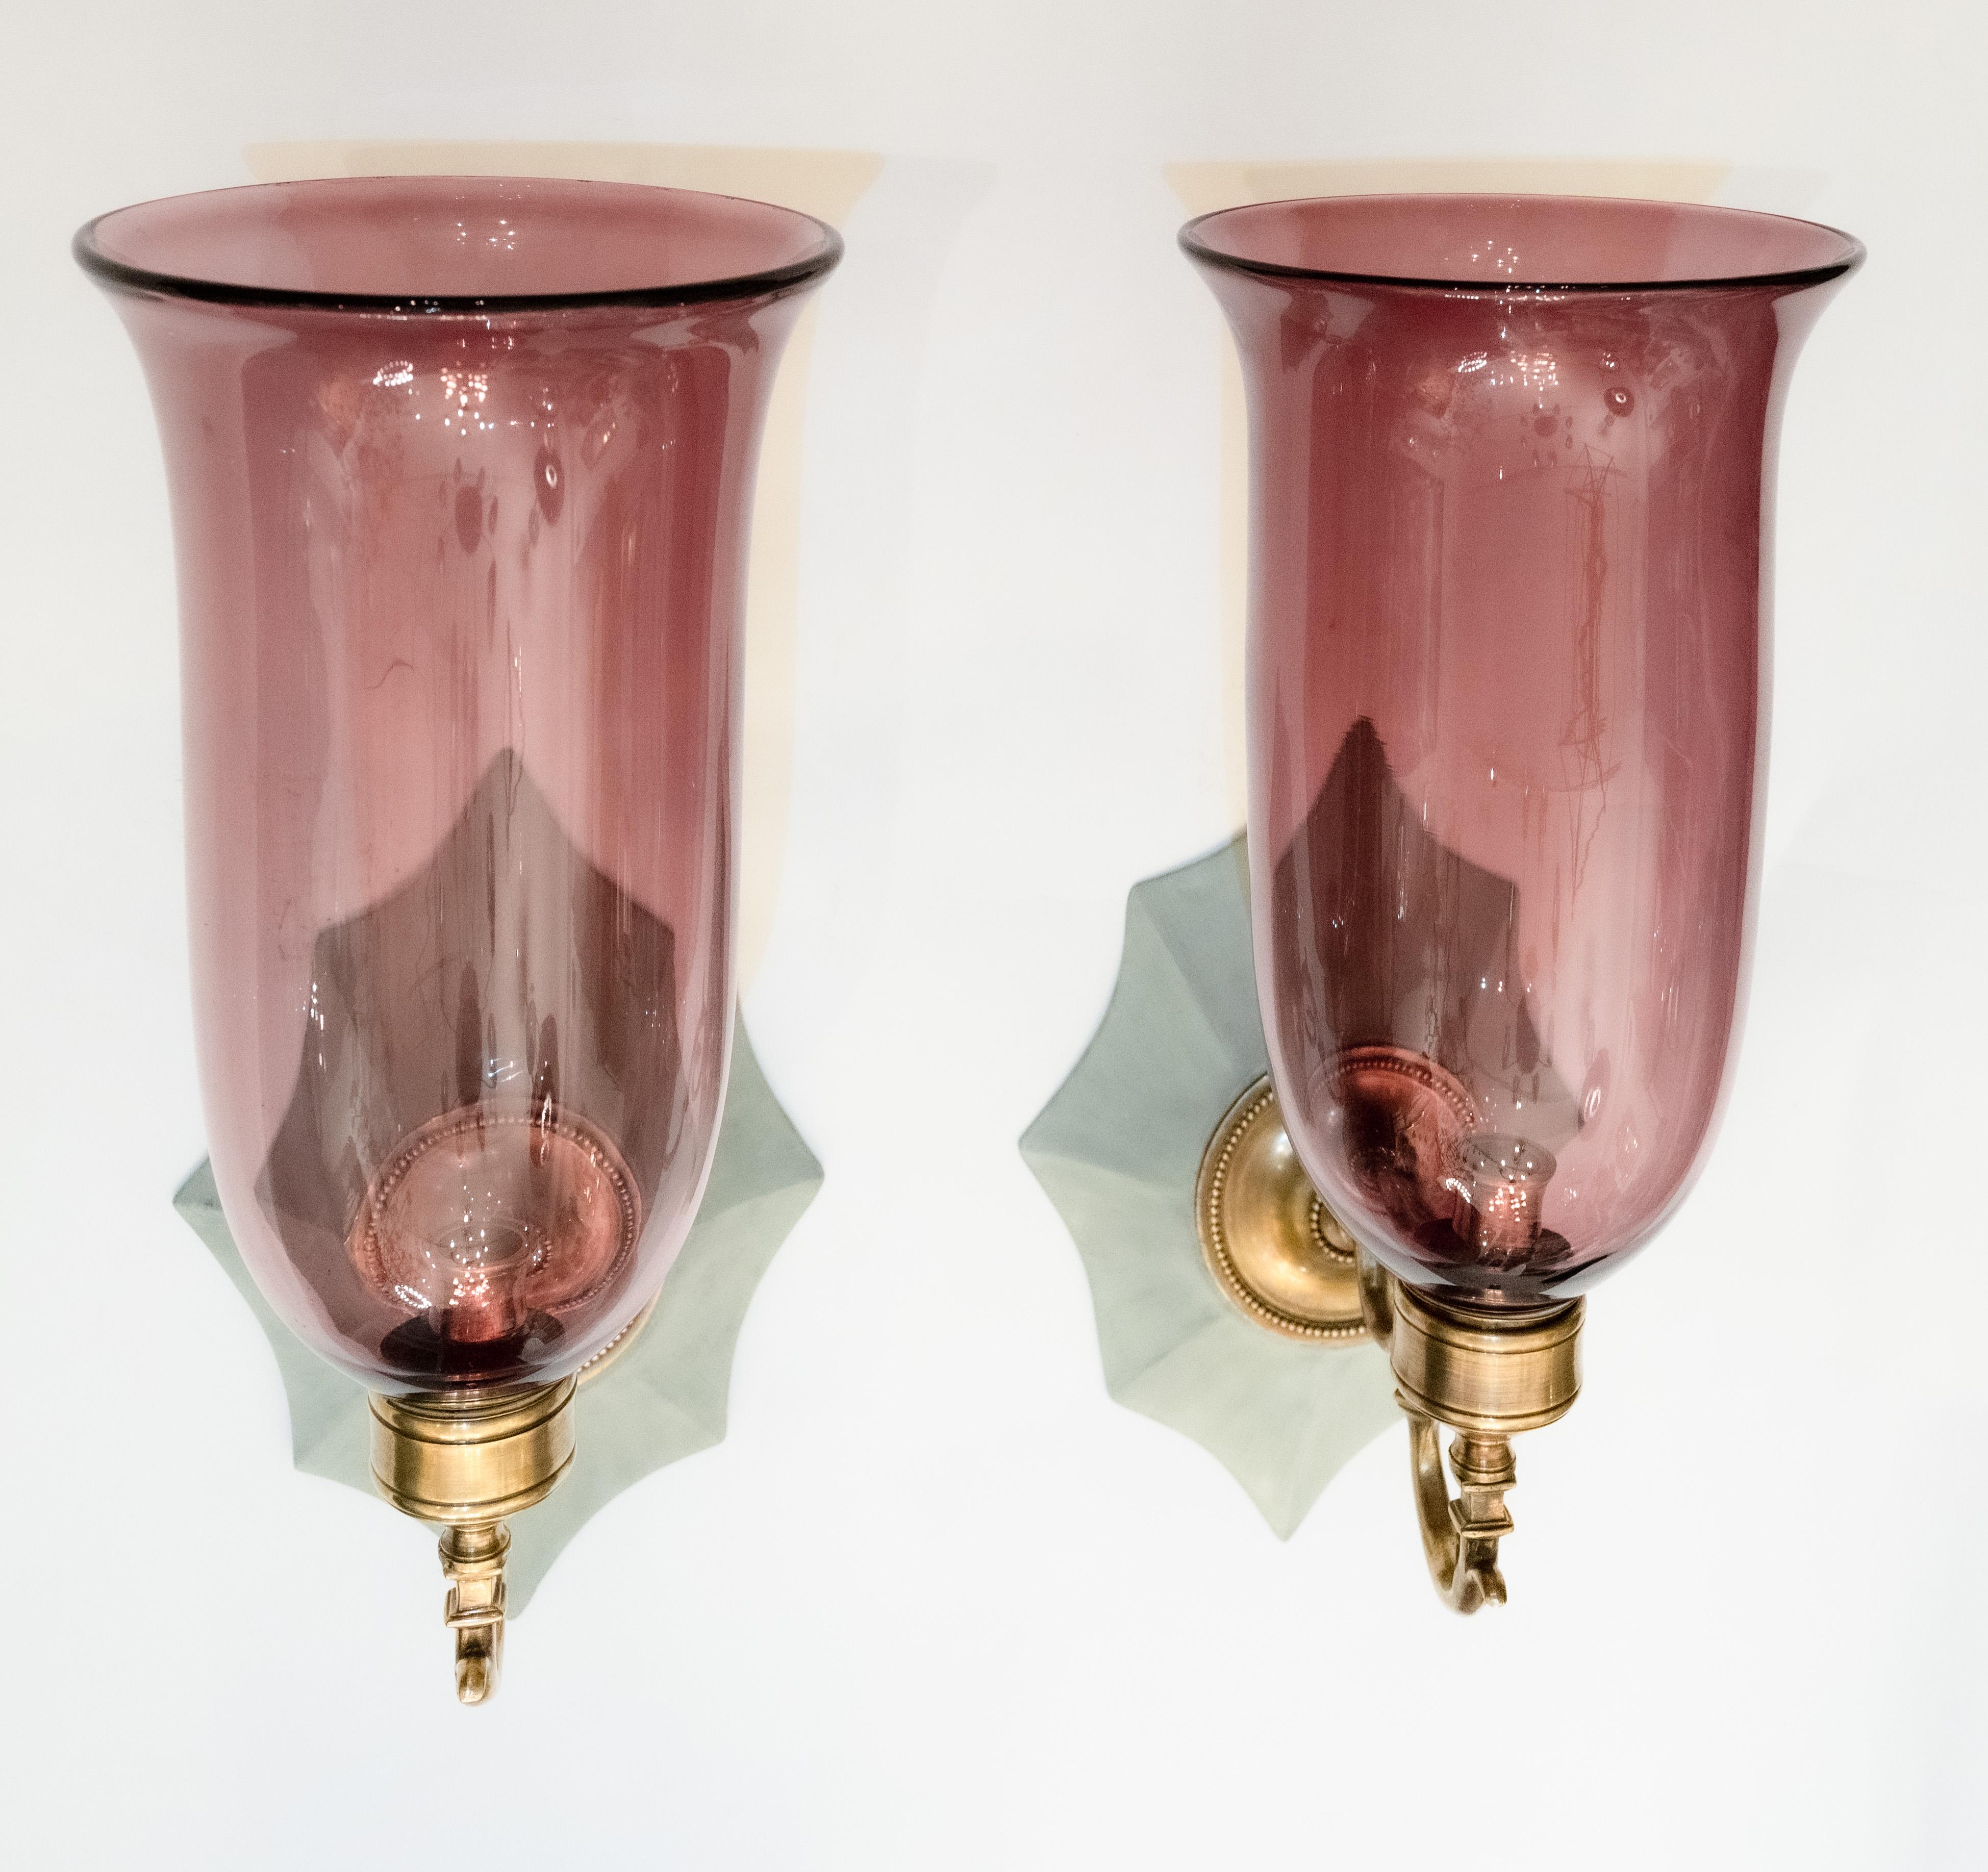 A pair of hand-carved Boissy sconces from mahogany Georgian-style backplates with a painted finish, patinated brass sconce fittings, and hand-blown flared shades. Electrified with one candelabra-based socket per sconce. Our custom hurricane sconces